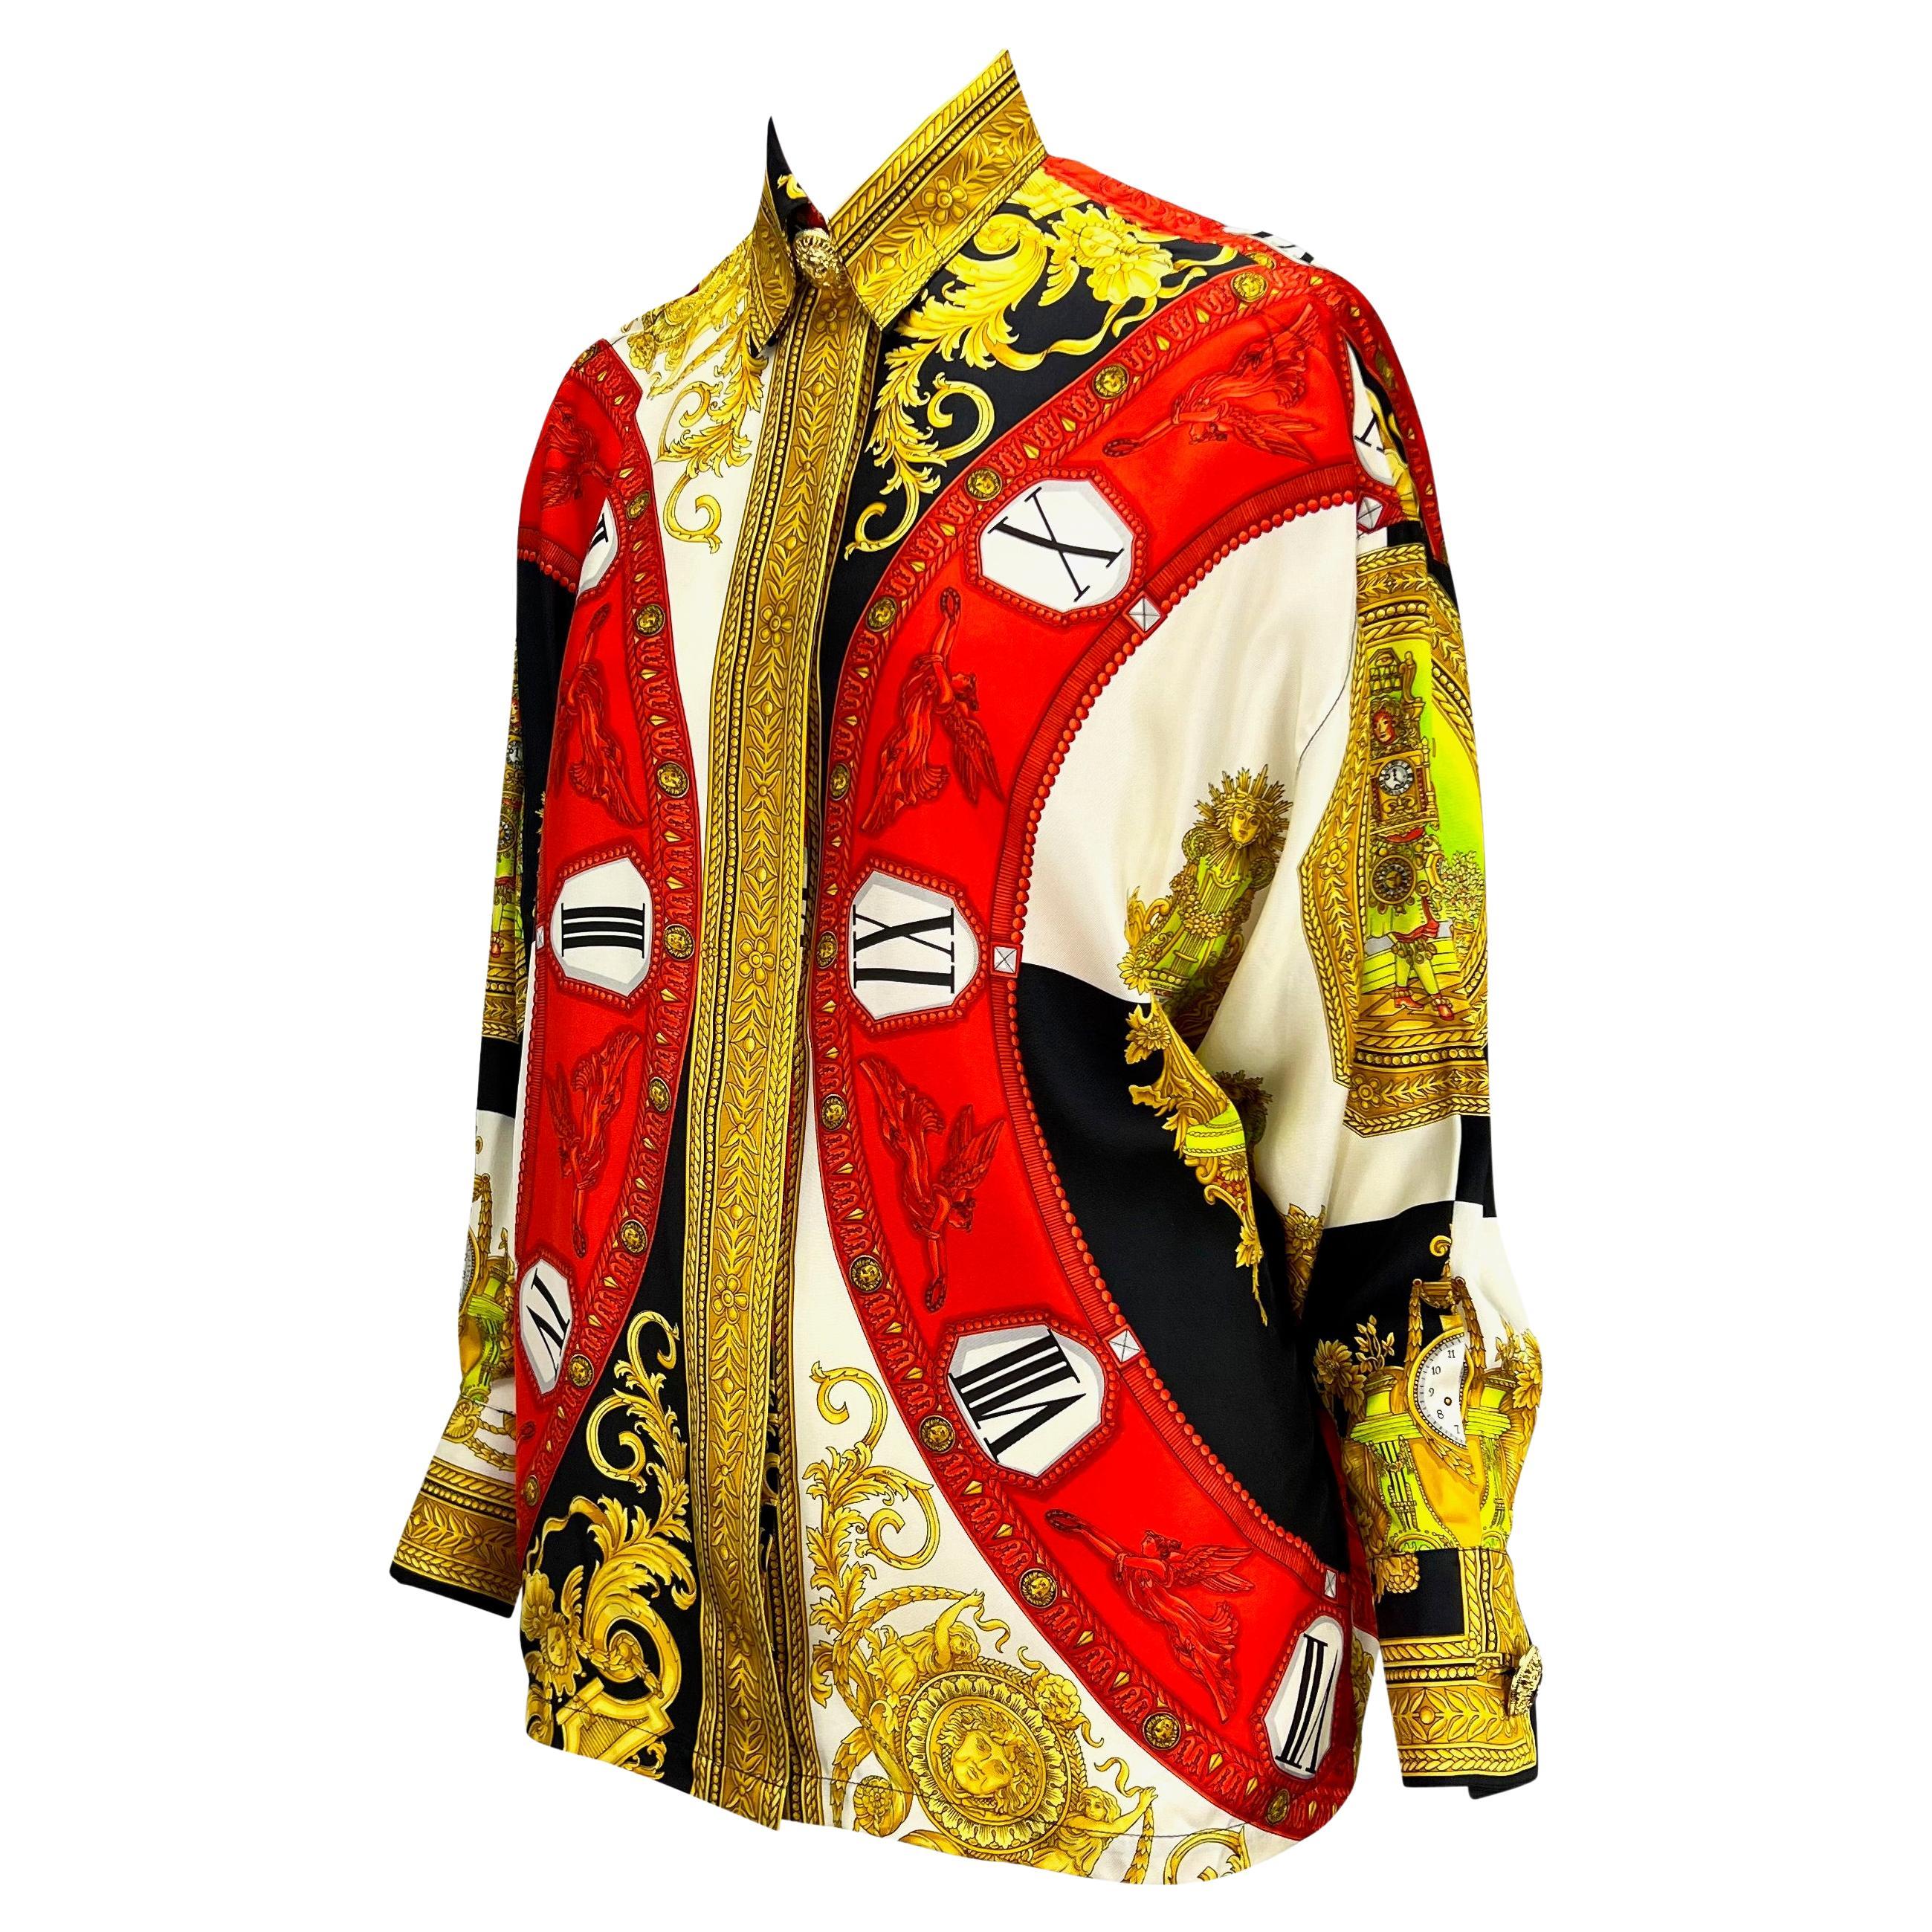 Presenting a splendid printed silk button-up blouse designed by Gianni Versace for his Spring/Summer 1993 collection. Featuring multiple King Louis XIV style clocks, multiple Medusa cameos, Roman numerals, golden sun buttons, and a hidden-button